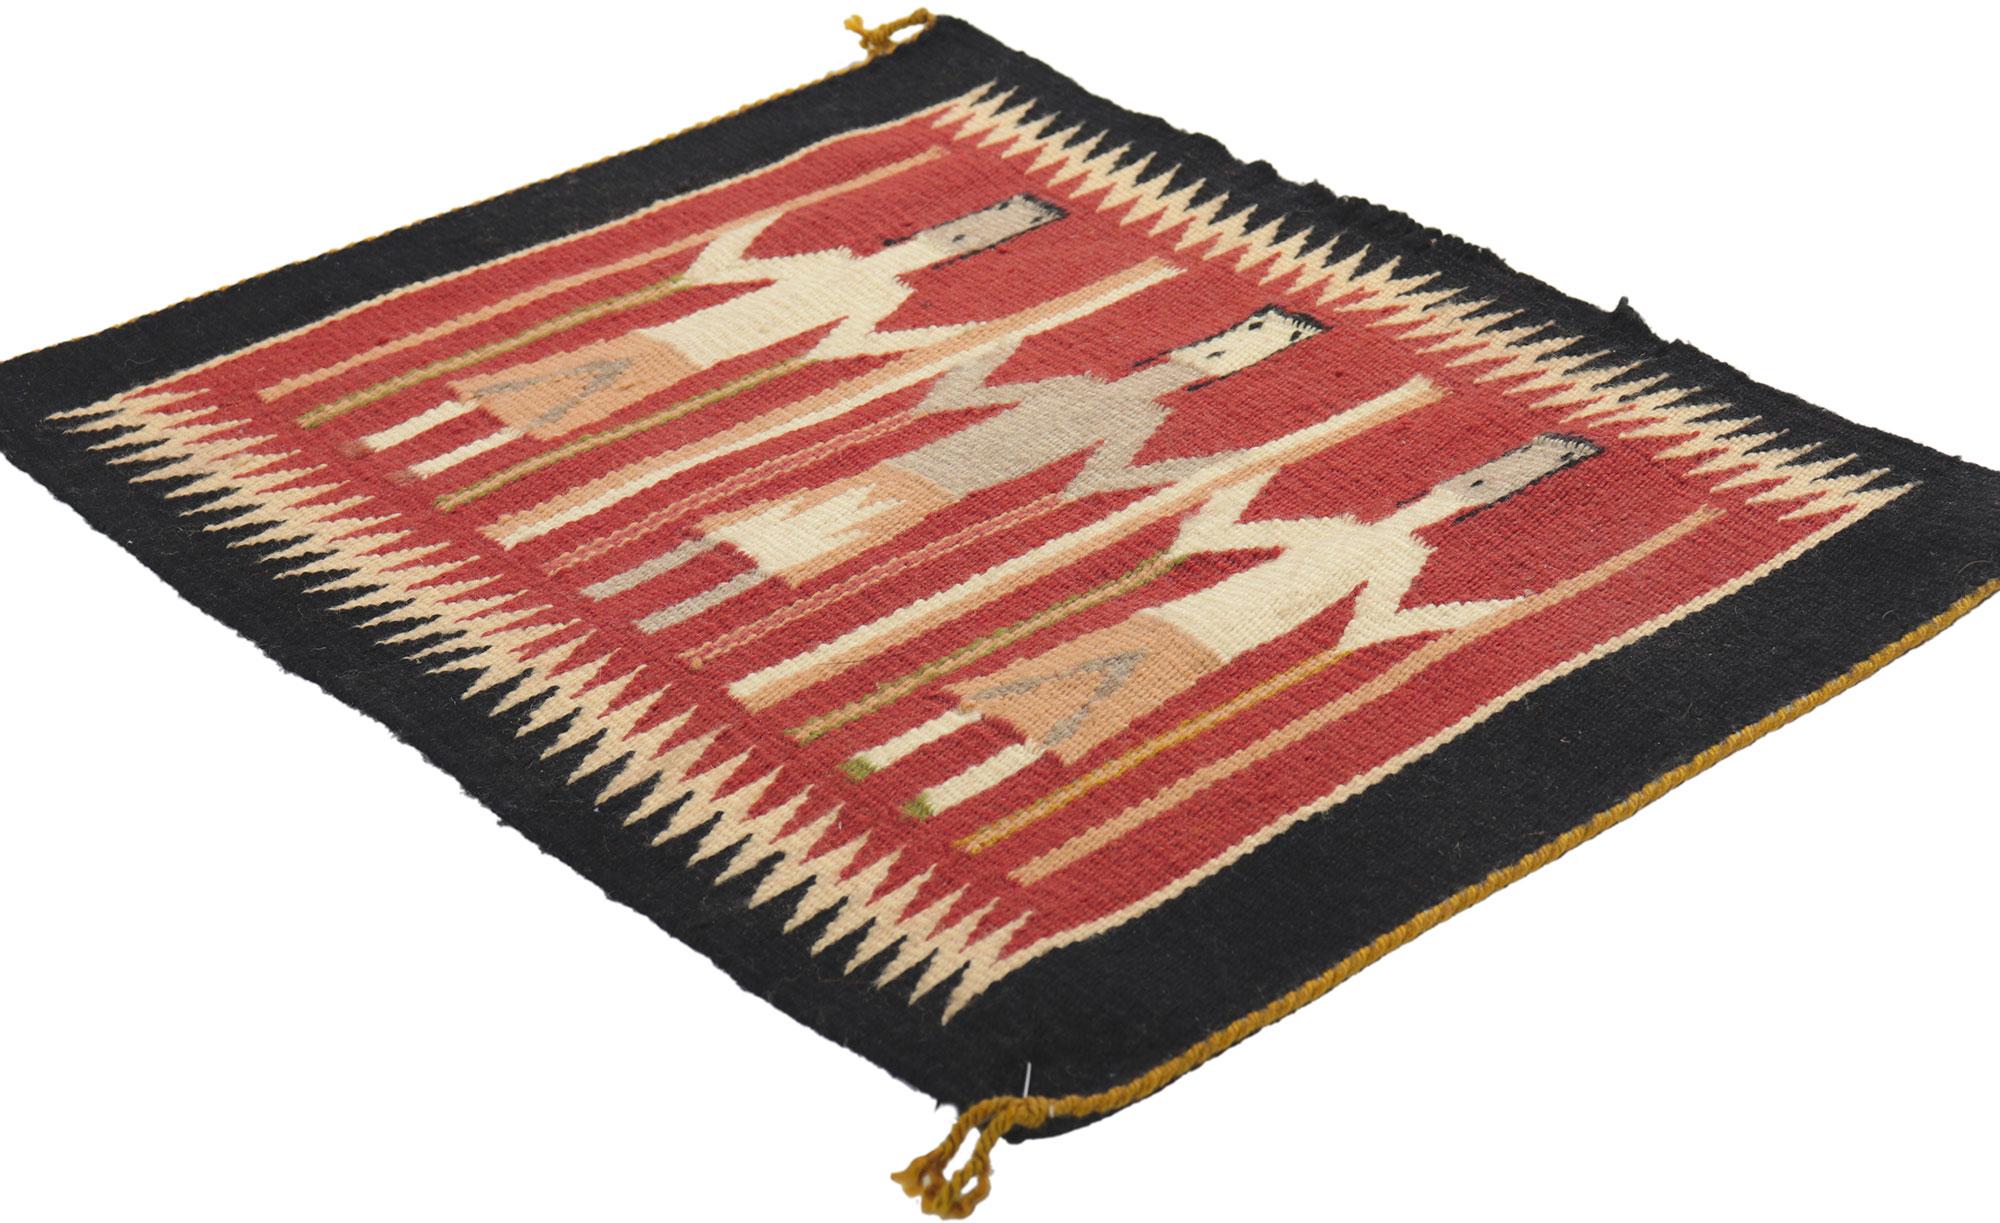 78426 Vintage Navajo Yeibichai Rug, 01'06 x 01'10.
Full of tiny details and a bold expressive design, this handwoven wool vintage Navajo Yeibichai rug is a captivating vision of woven beauty. The abrashed red field features three female Yei